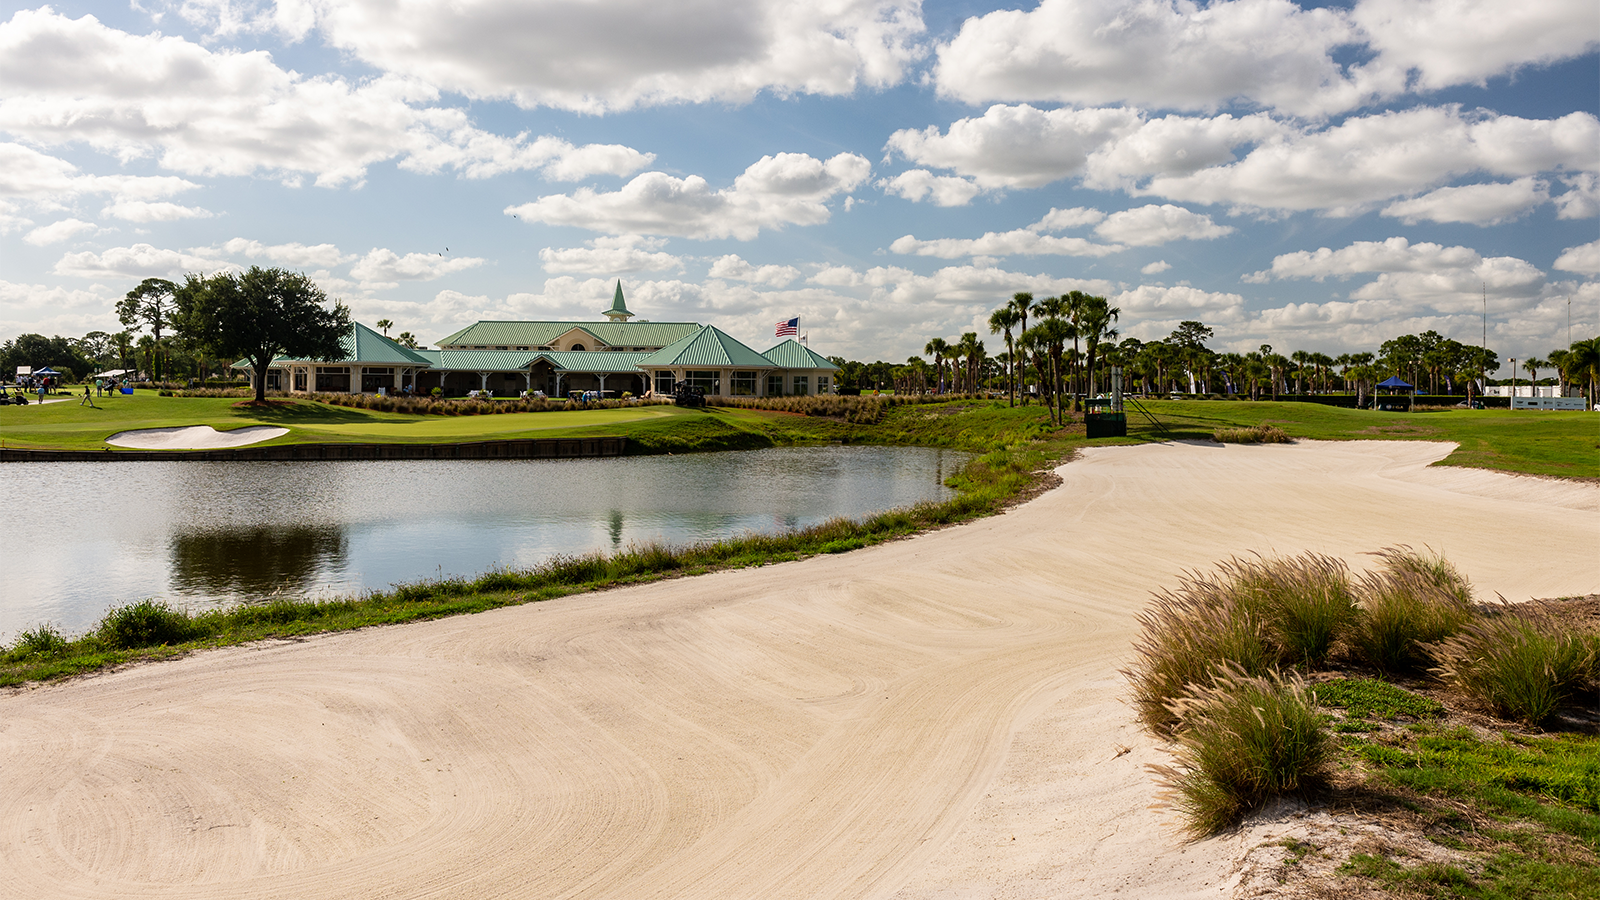 Scenic view of the 18th hole at PGA Golf Club on April 27, 2021 in Port St. Lucie, Florida. (Photo by Montana Pritchard/PGA of America)